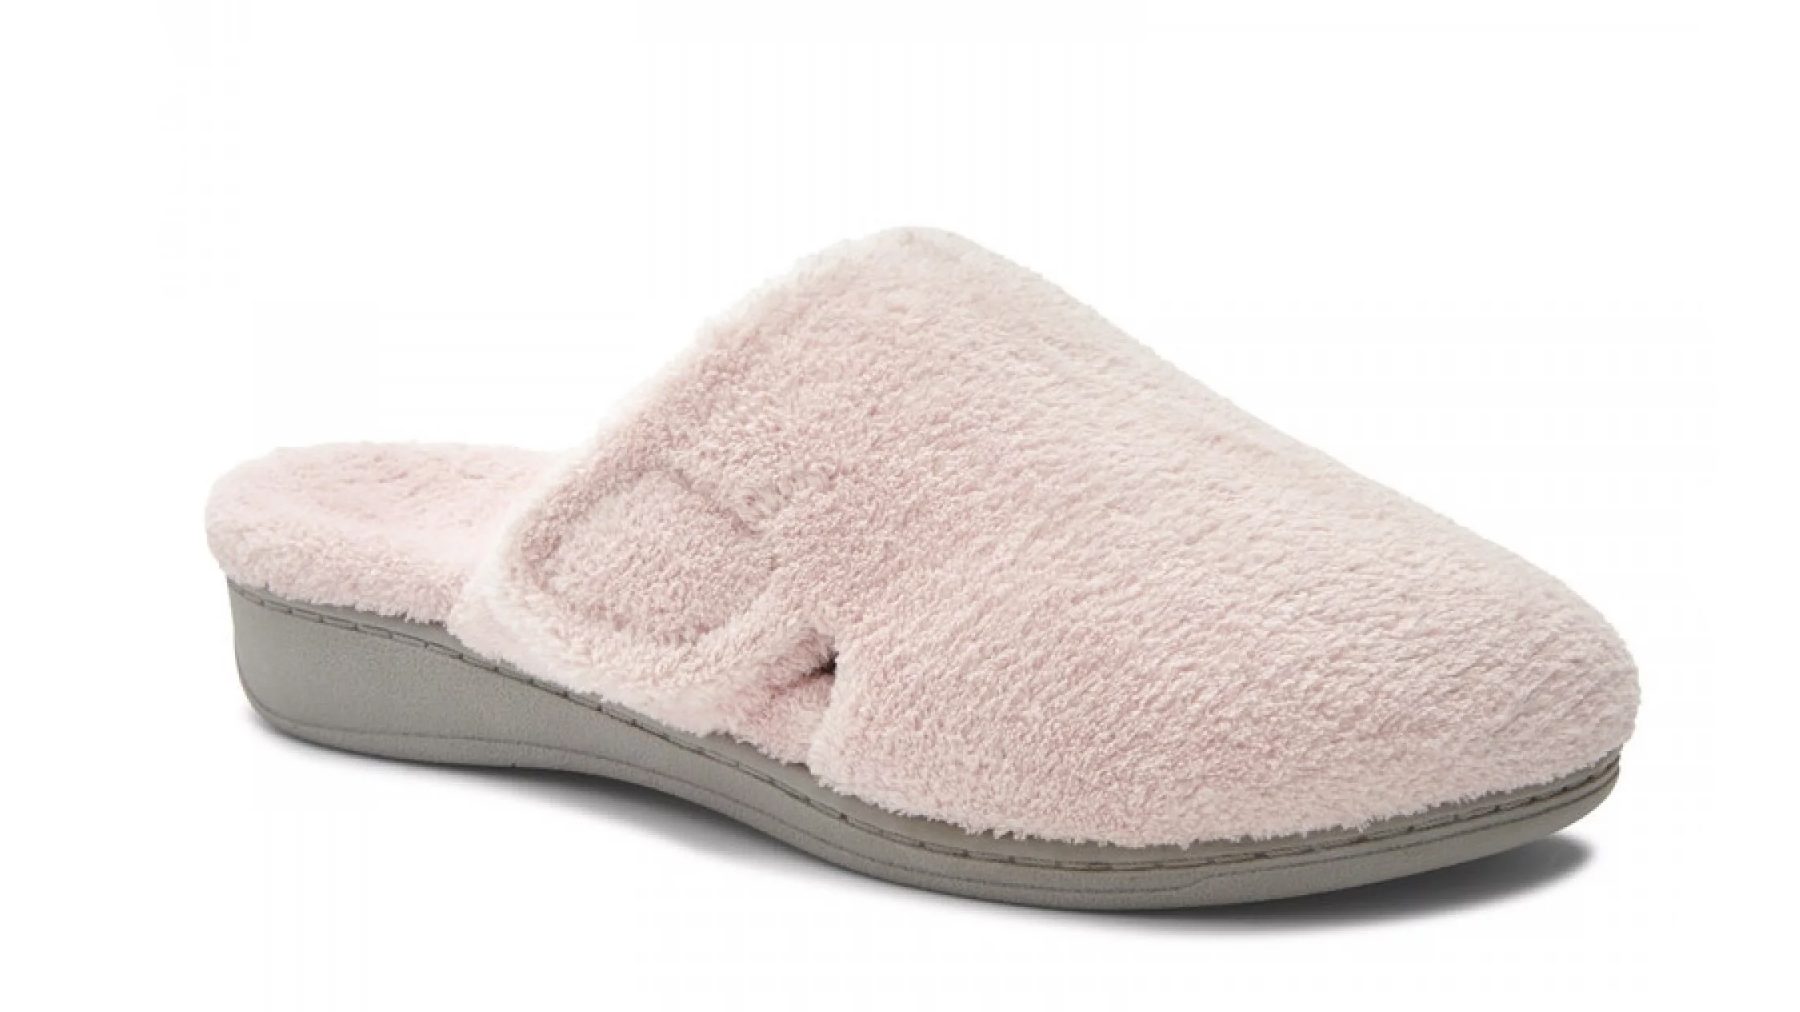 women's narrow slippers with arch support